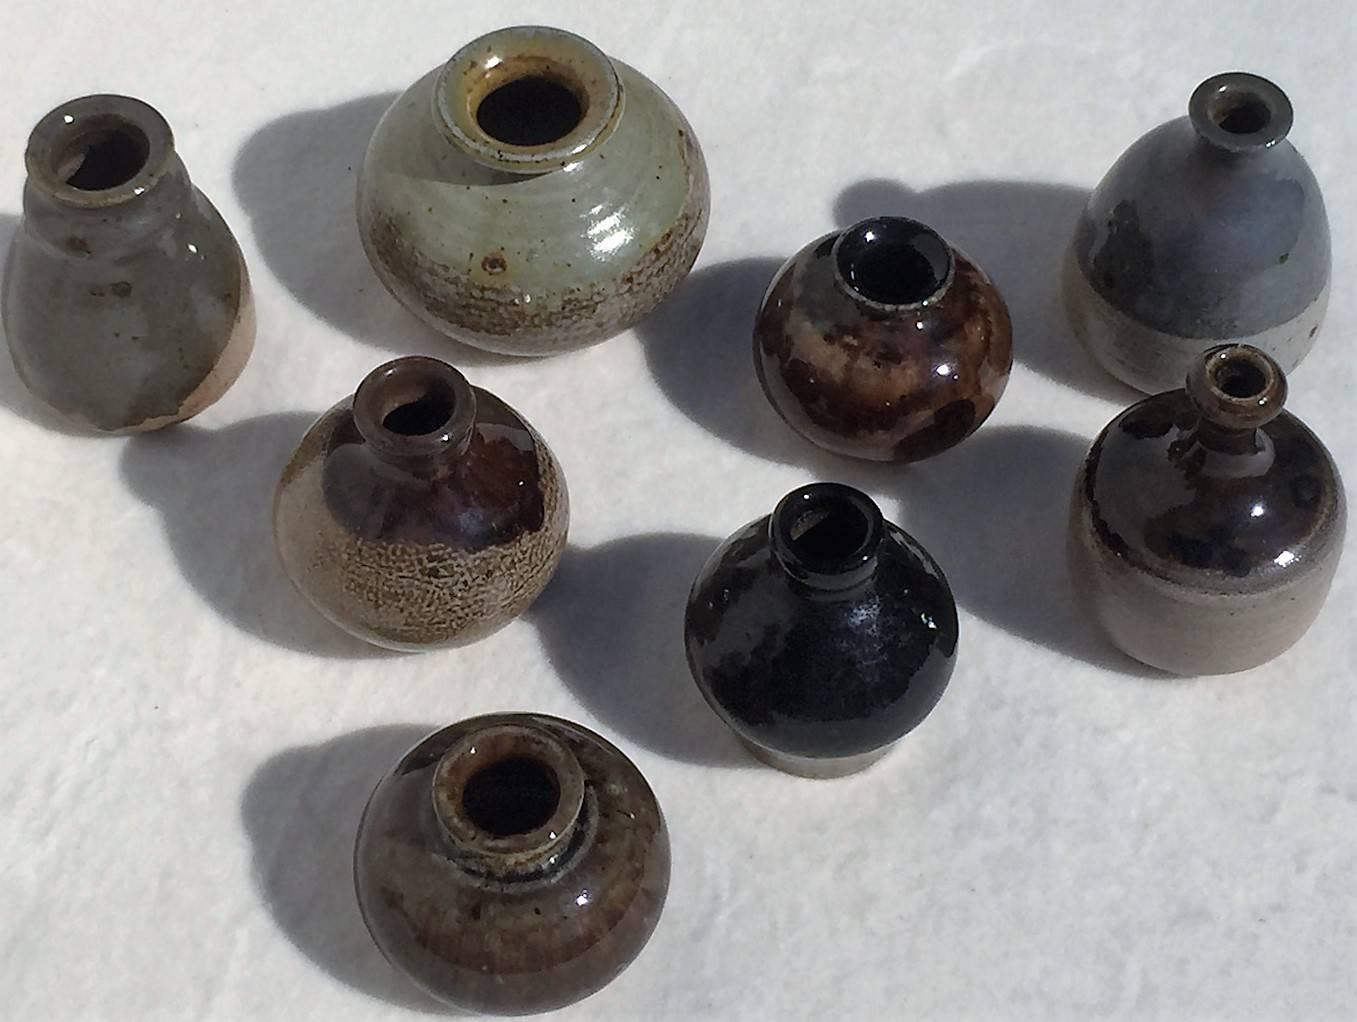 A set of eight unique turned ceramical miniature vases by Lilo Grinzoff-Assenmacher, Germany, 1960s. Salt glazed in glossy blue, grey, brown and cream. The salt glazed ceramic is burned at high temperatures and is extremely durable. 
The largest is